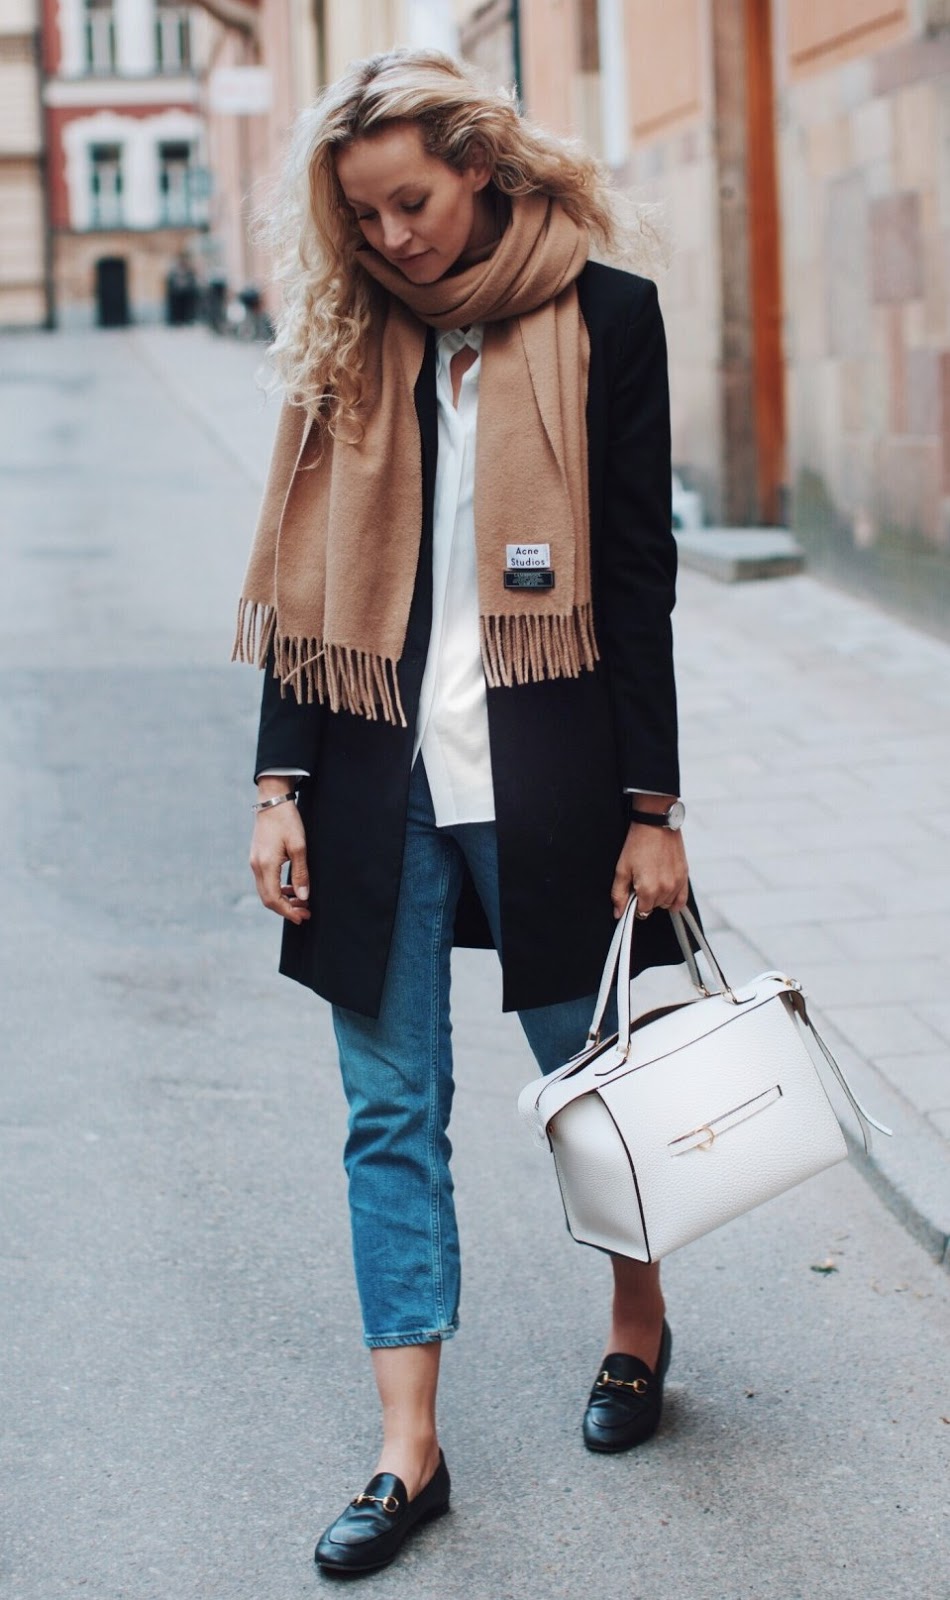 winter casual outfit inspiration / blazer + brown scarf + white shirt + jeans + bag + loafers